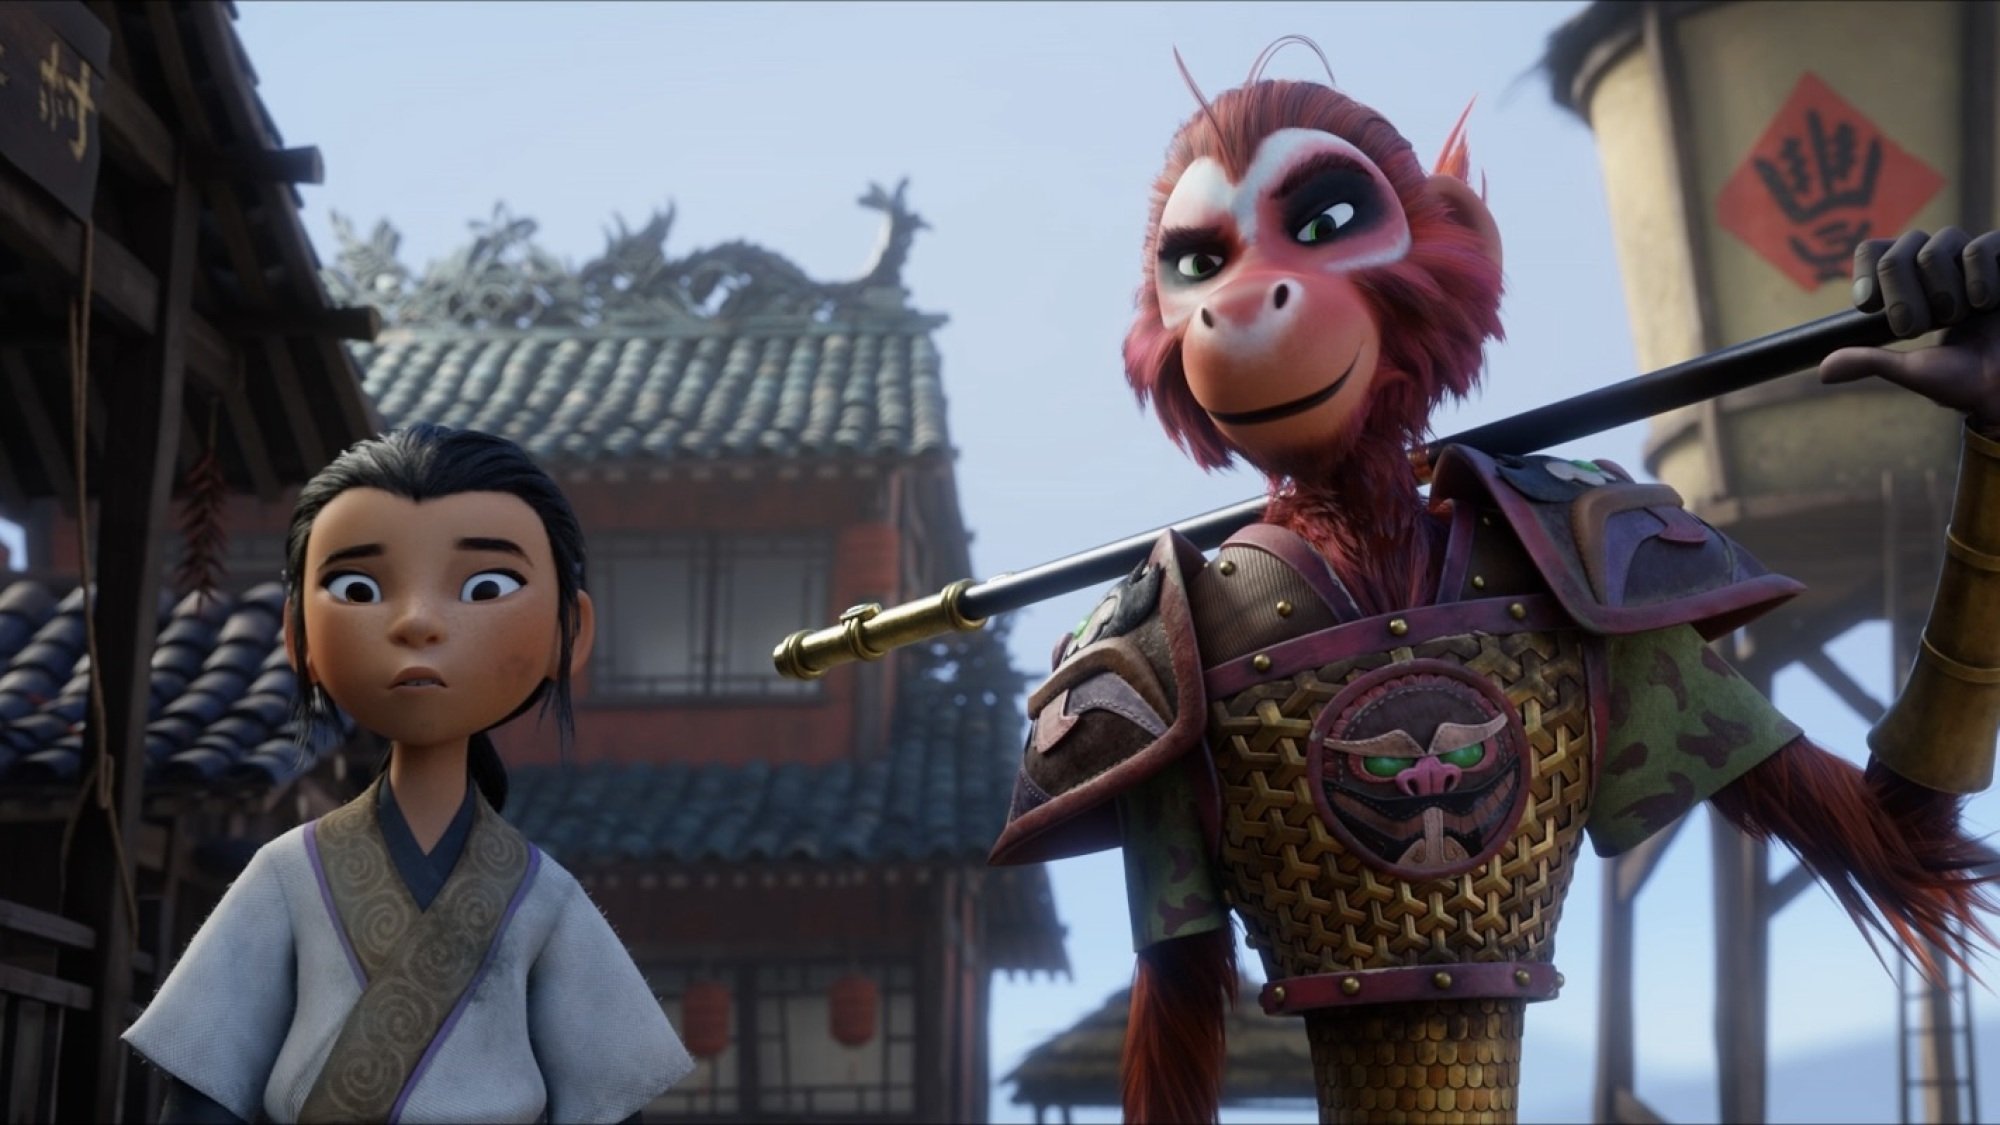 A young girl and a red monkey in armor holding a staff over his shoulder.